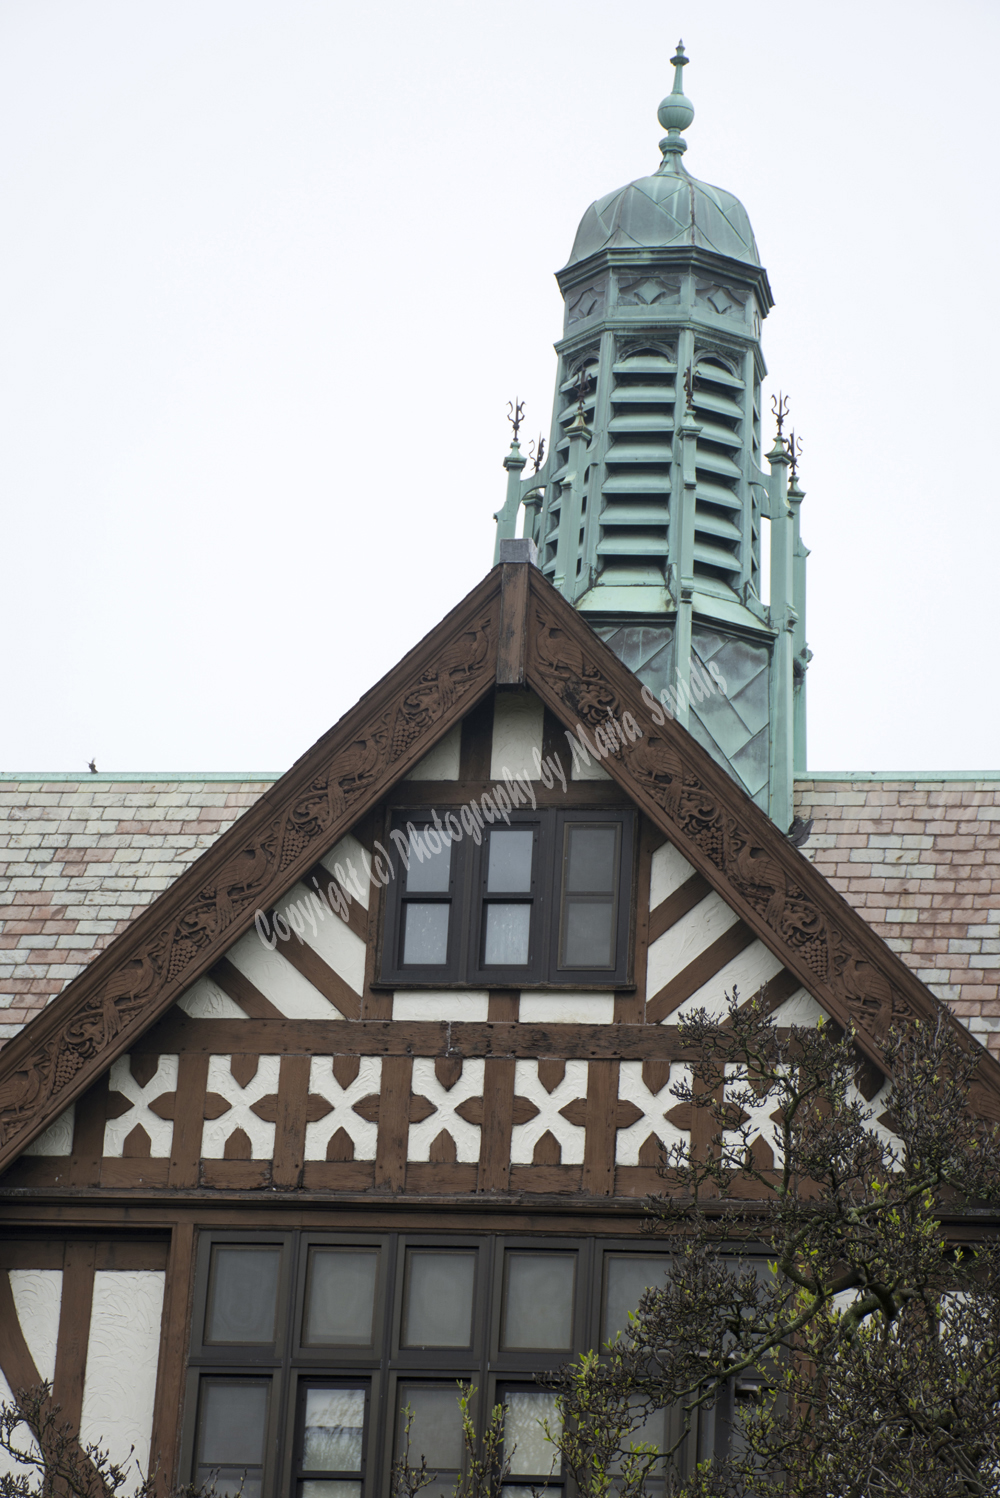 Architecture by Guilbert & Betelle - Tuscan School, Maplewood, NJ